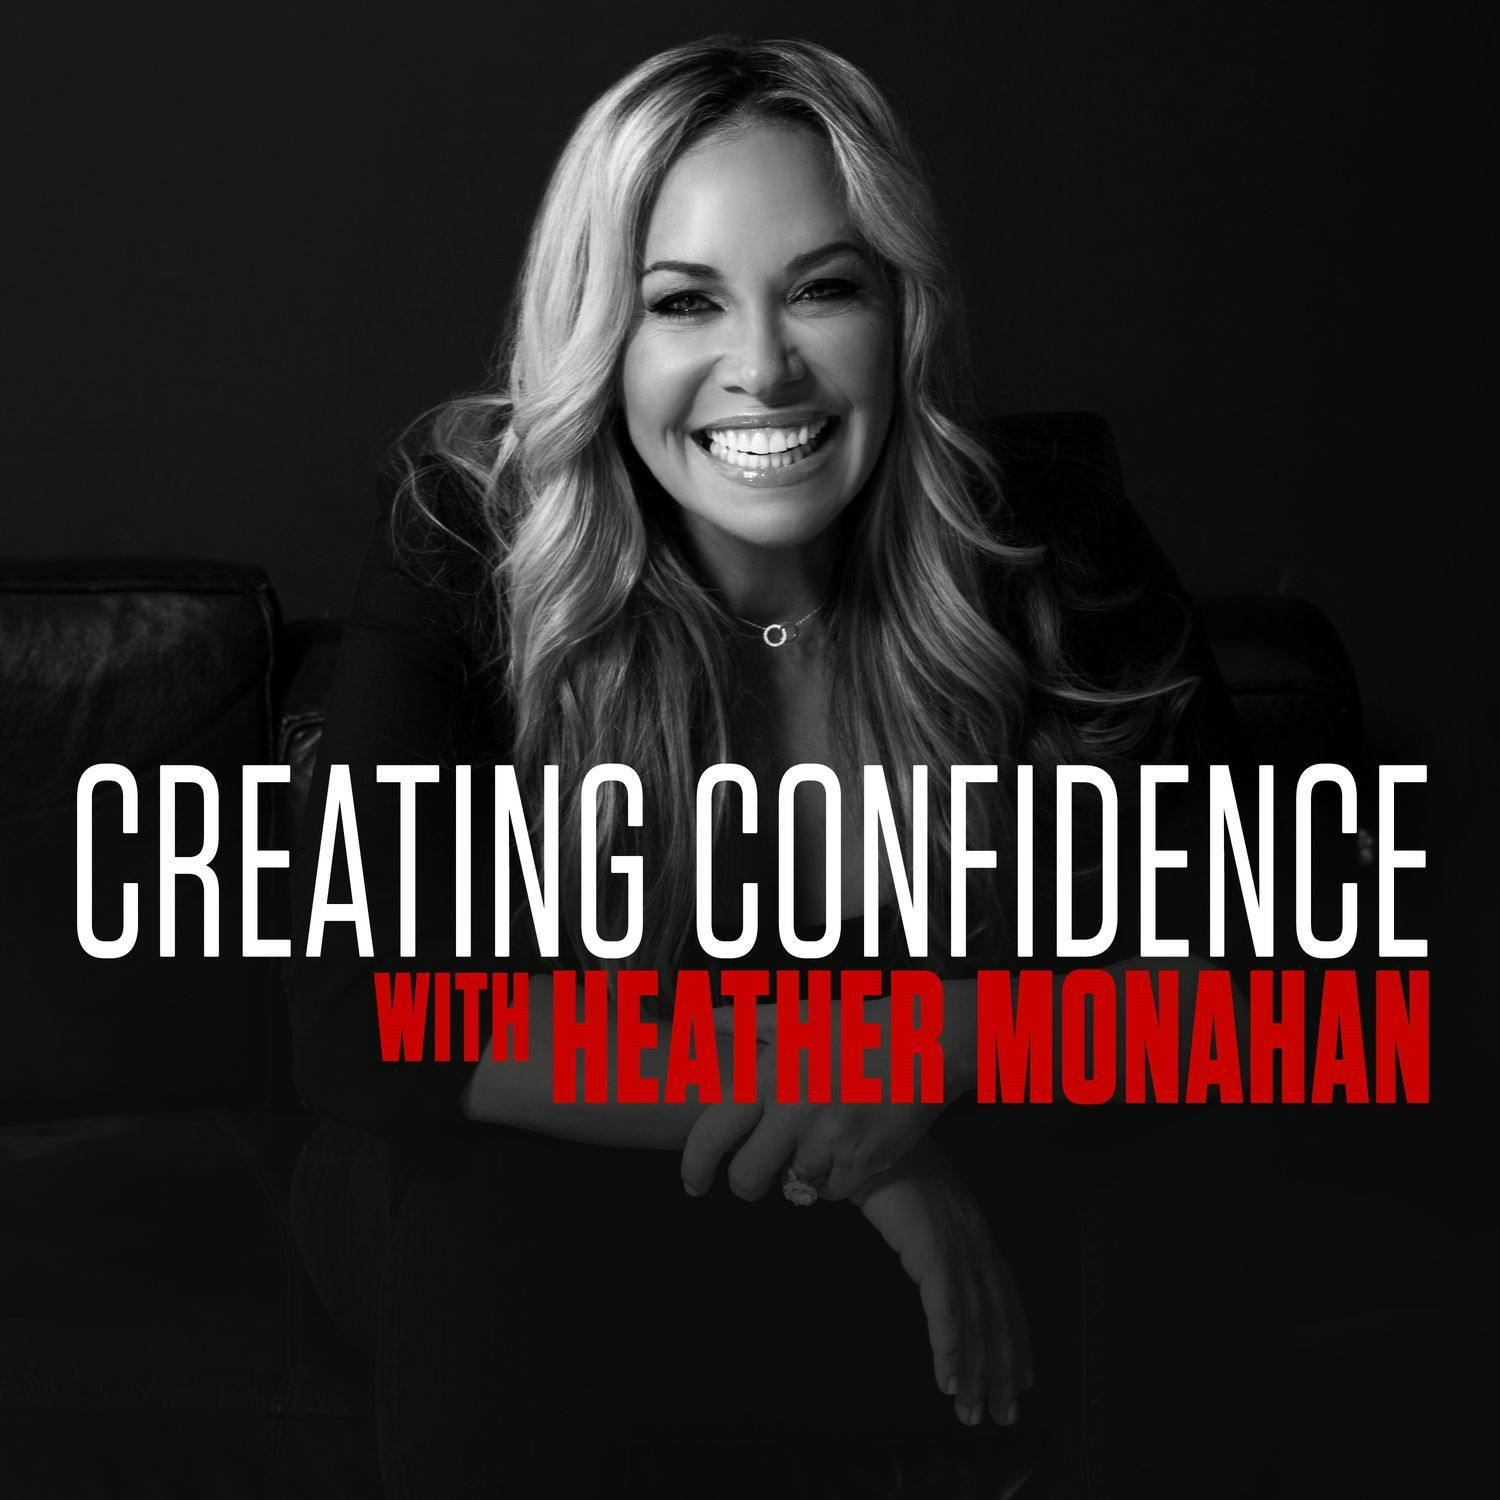 #161: How To Turn Obstacles Into Opportunities! With Tanya Dalton CEO & Founder Of inkWELL Press by Heather Monahan | YAP Media Network